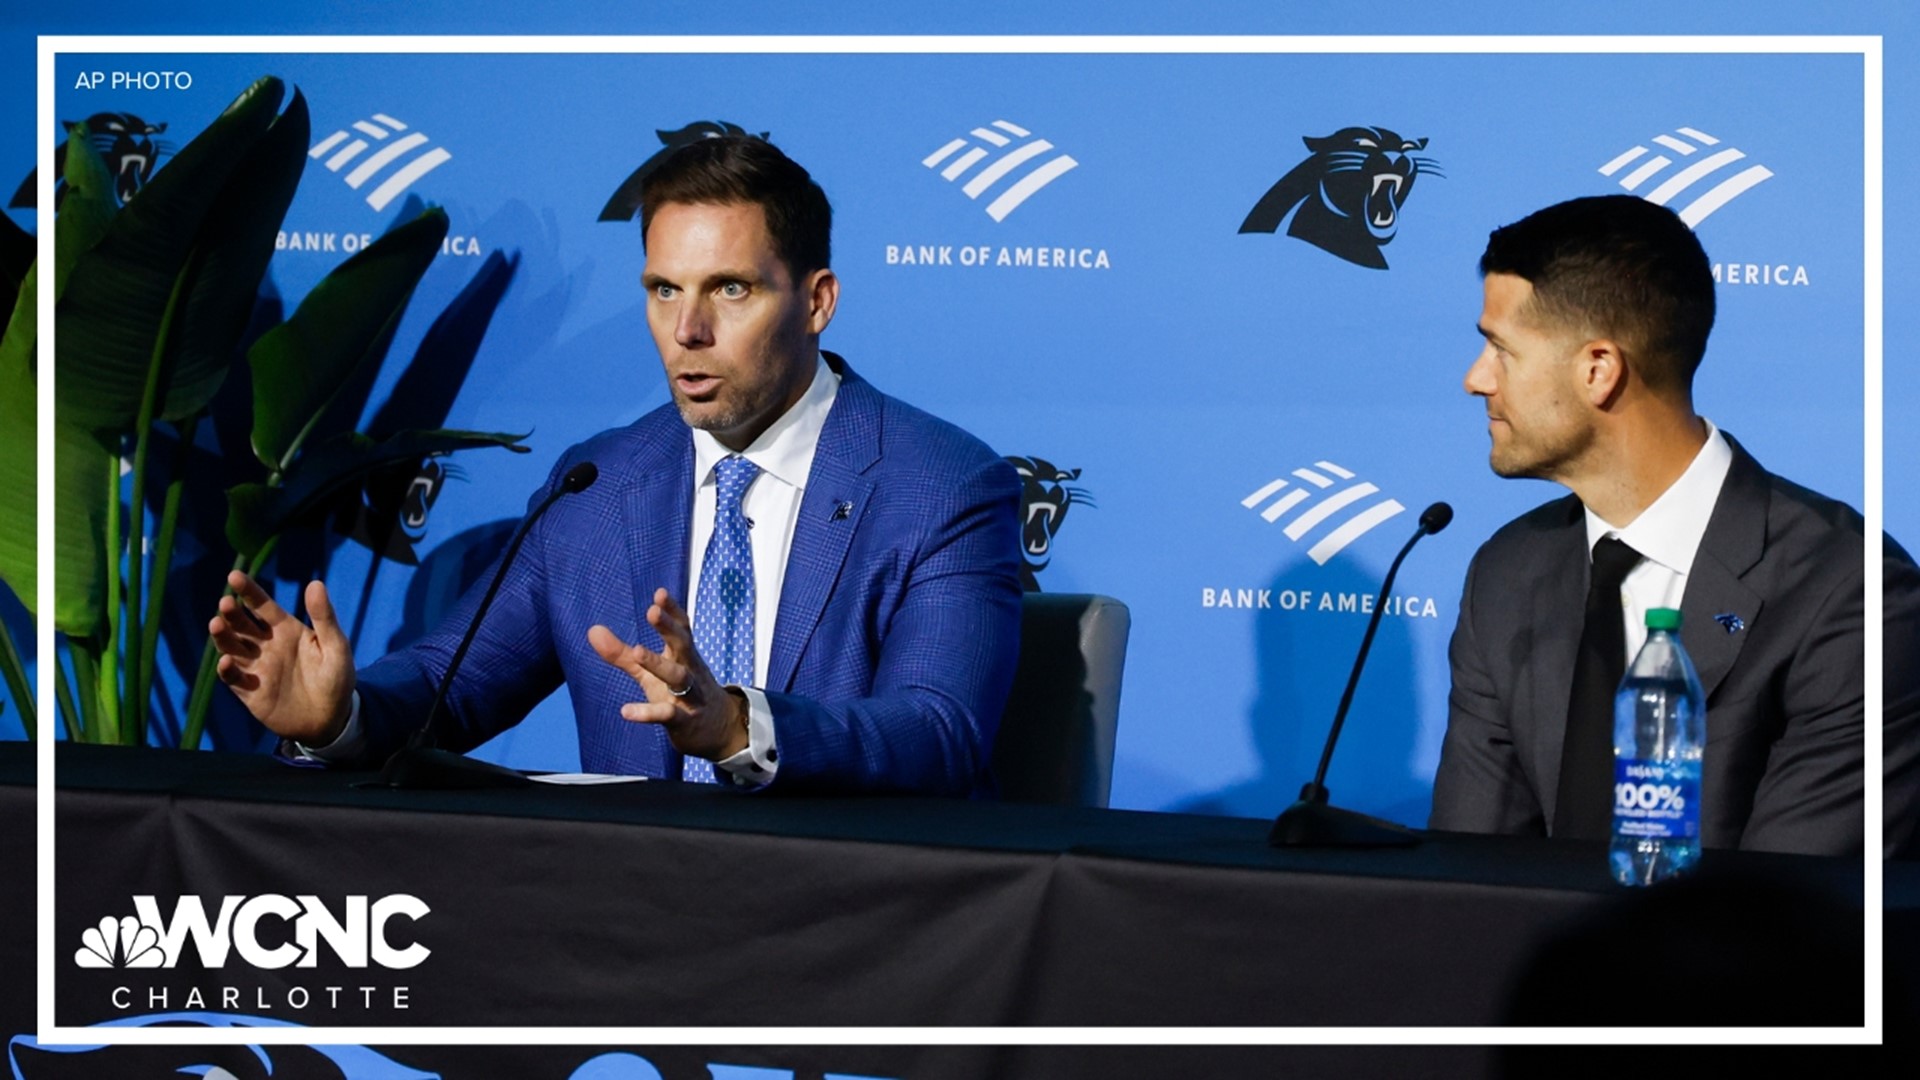 Thursday, the Charlotte public was introduced to the new Panthers head coach Dave Canales and general manager Dan Morgan.